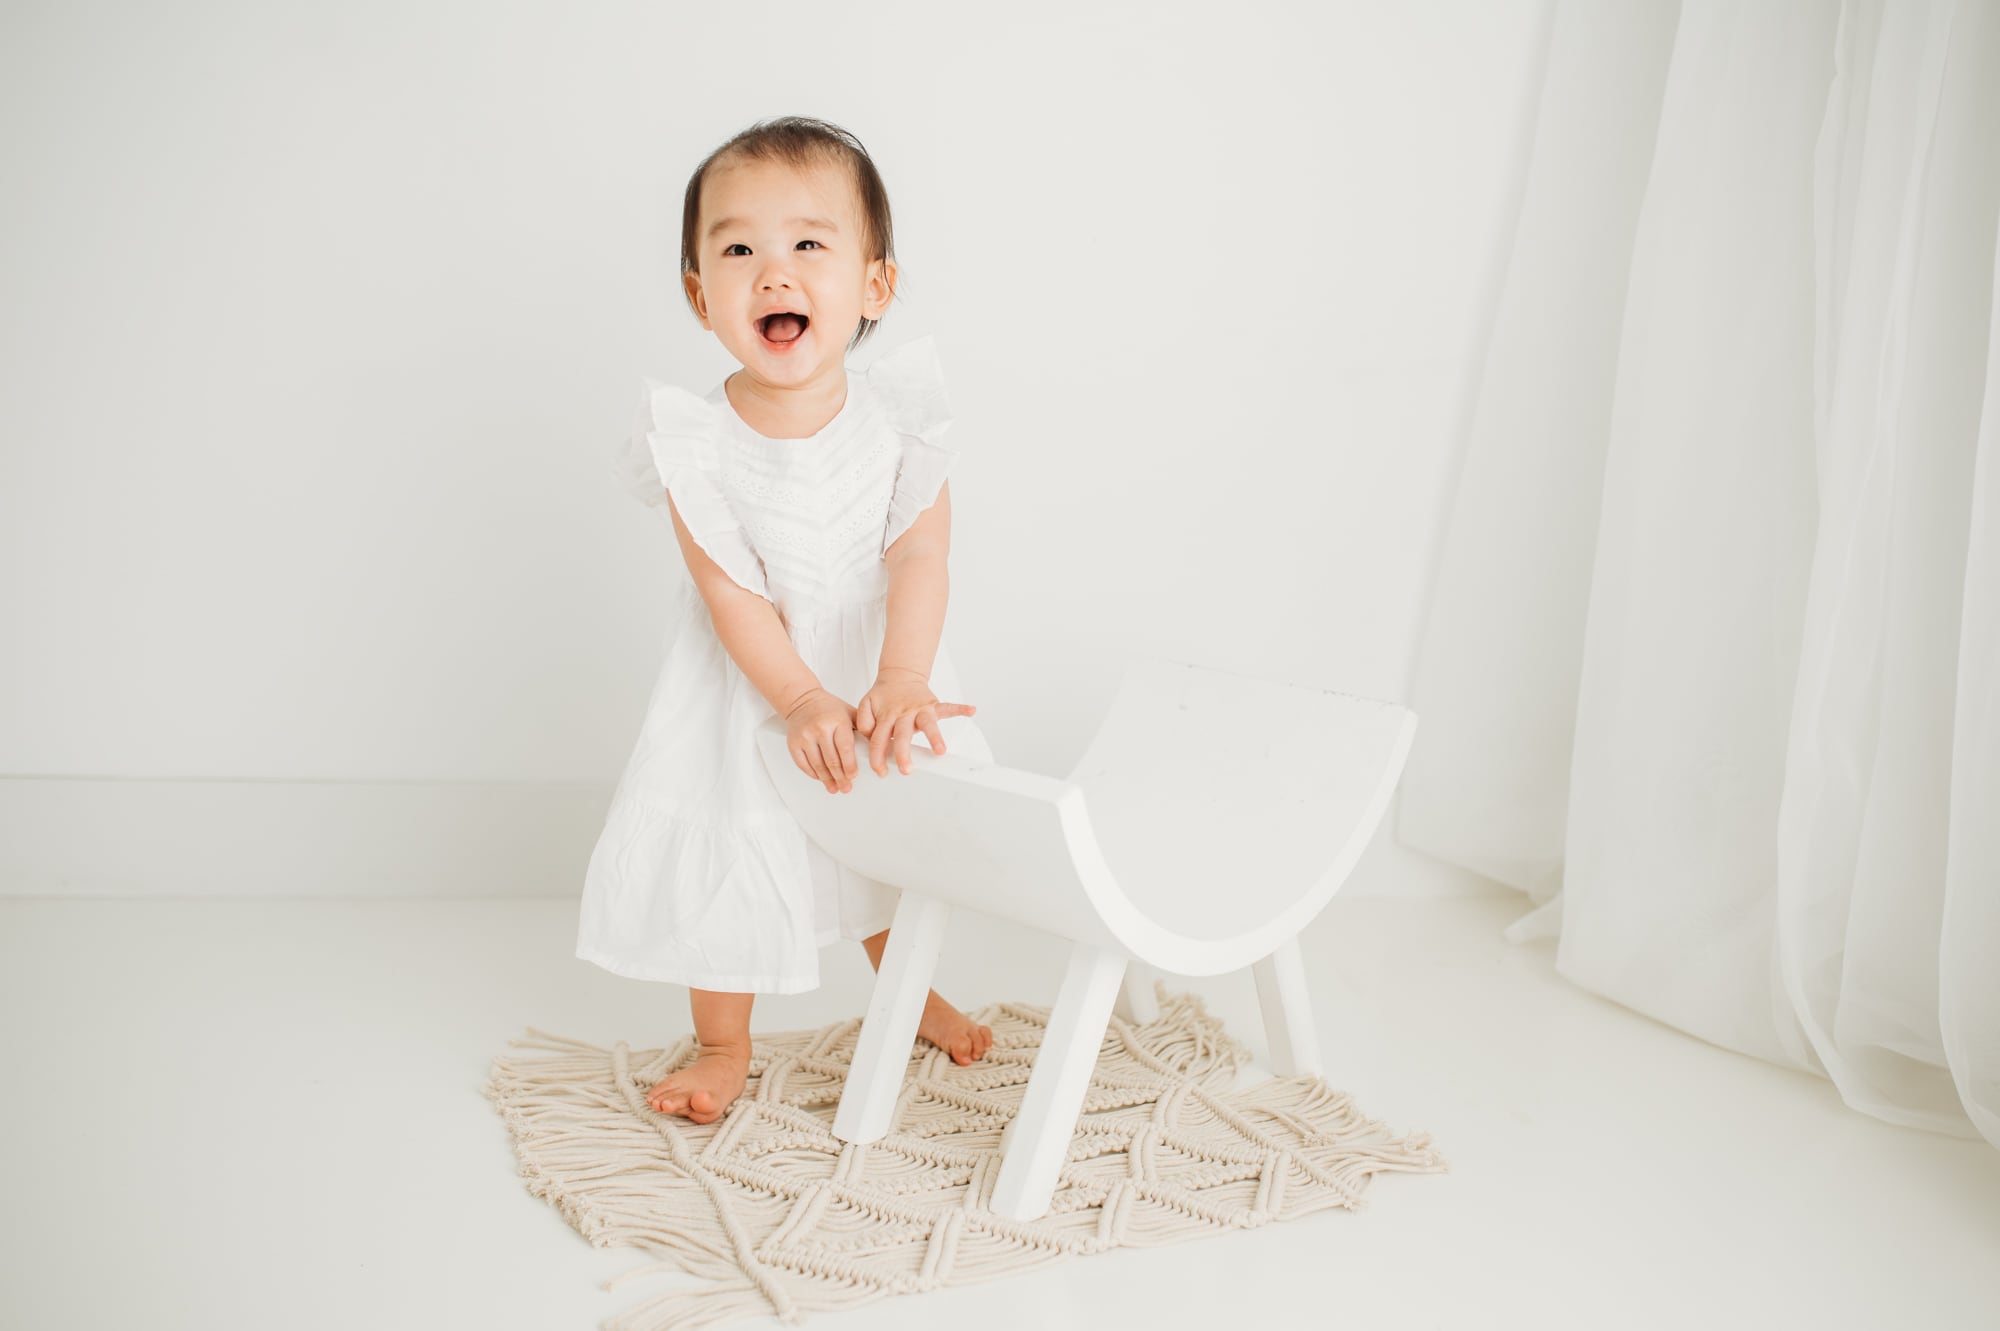 Asian girl laughs in a milestone portrait taken for her first birthday session, standing next to a white bendy chair.